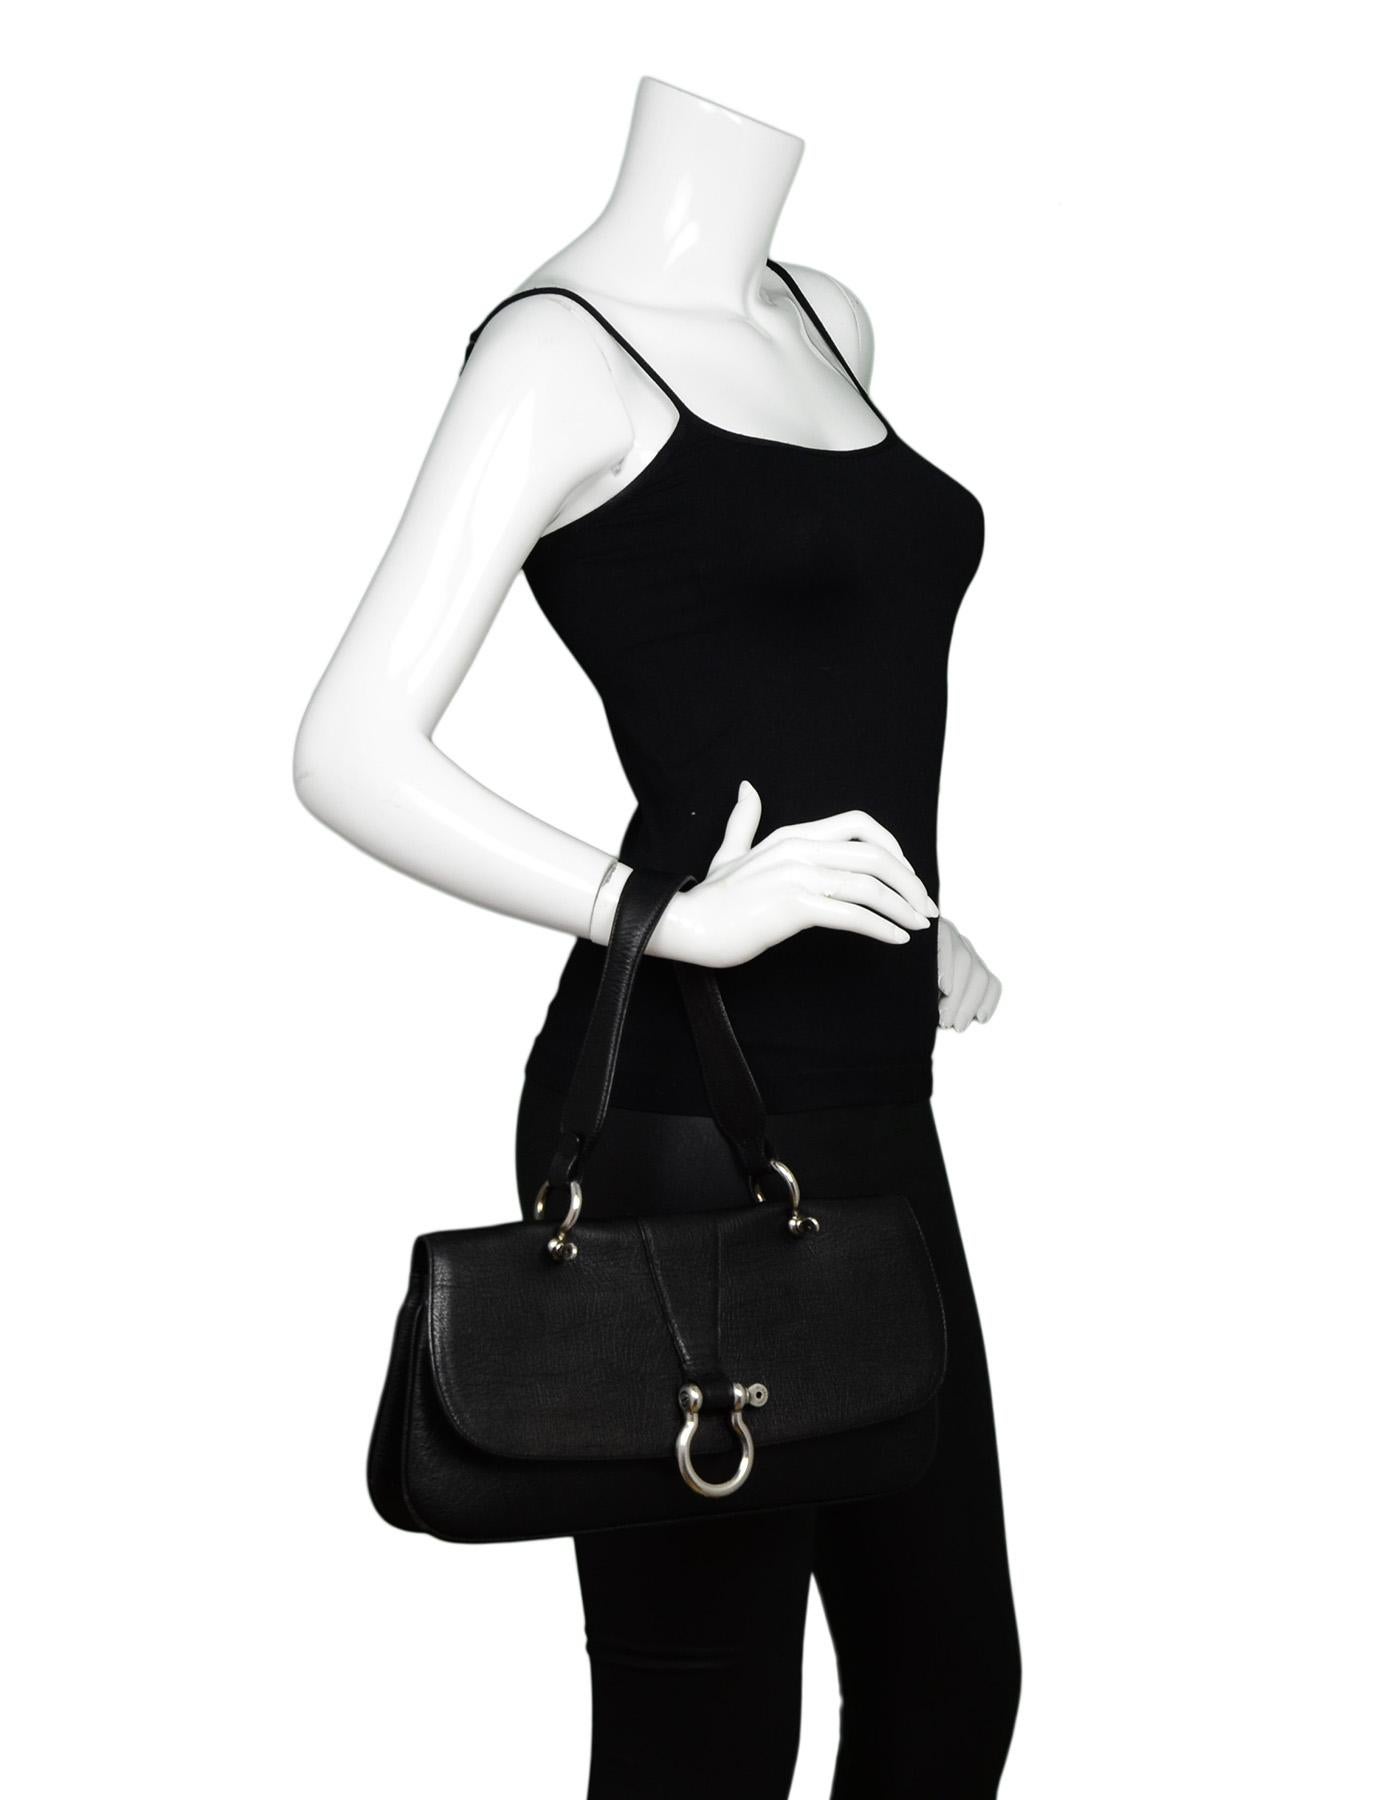 Burberry Black Leather Top Handle Flap Bag W/ Silver Ring Snap Flap Closure 

Made In: Italy
Color: Black
Hardware: Silvertone
Materials: Leather
Lining: Cream textile 
Closure/Opening: Flap top with snap closure
Exterior Pockets: None
Interior